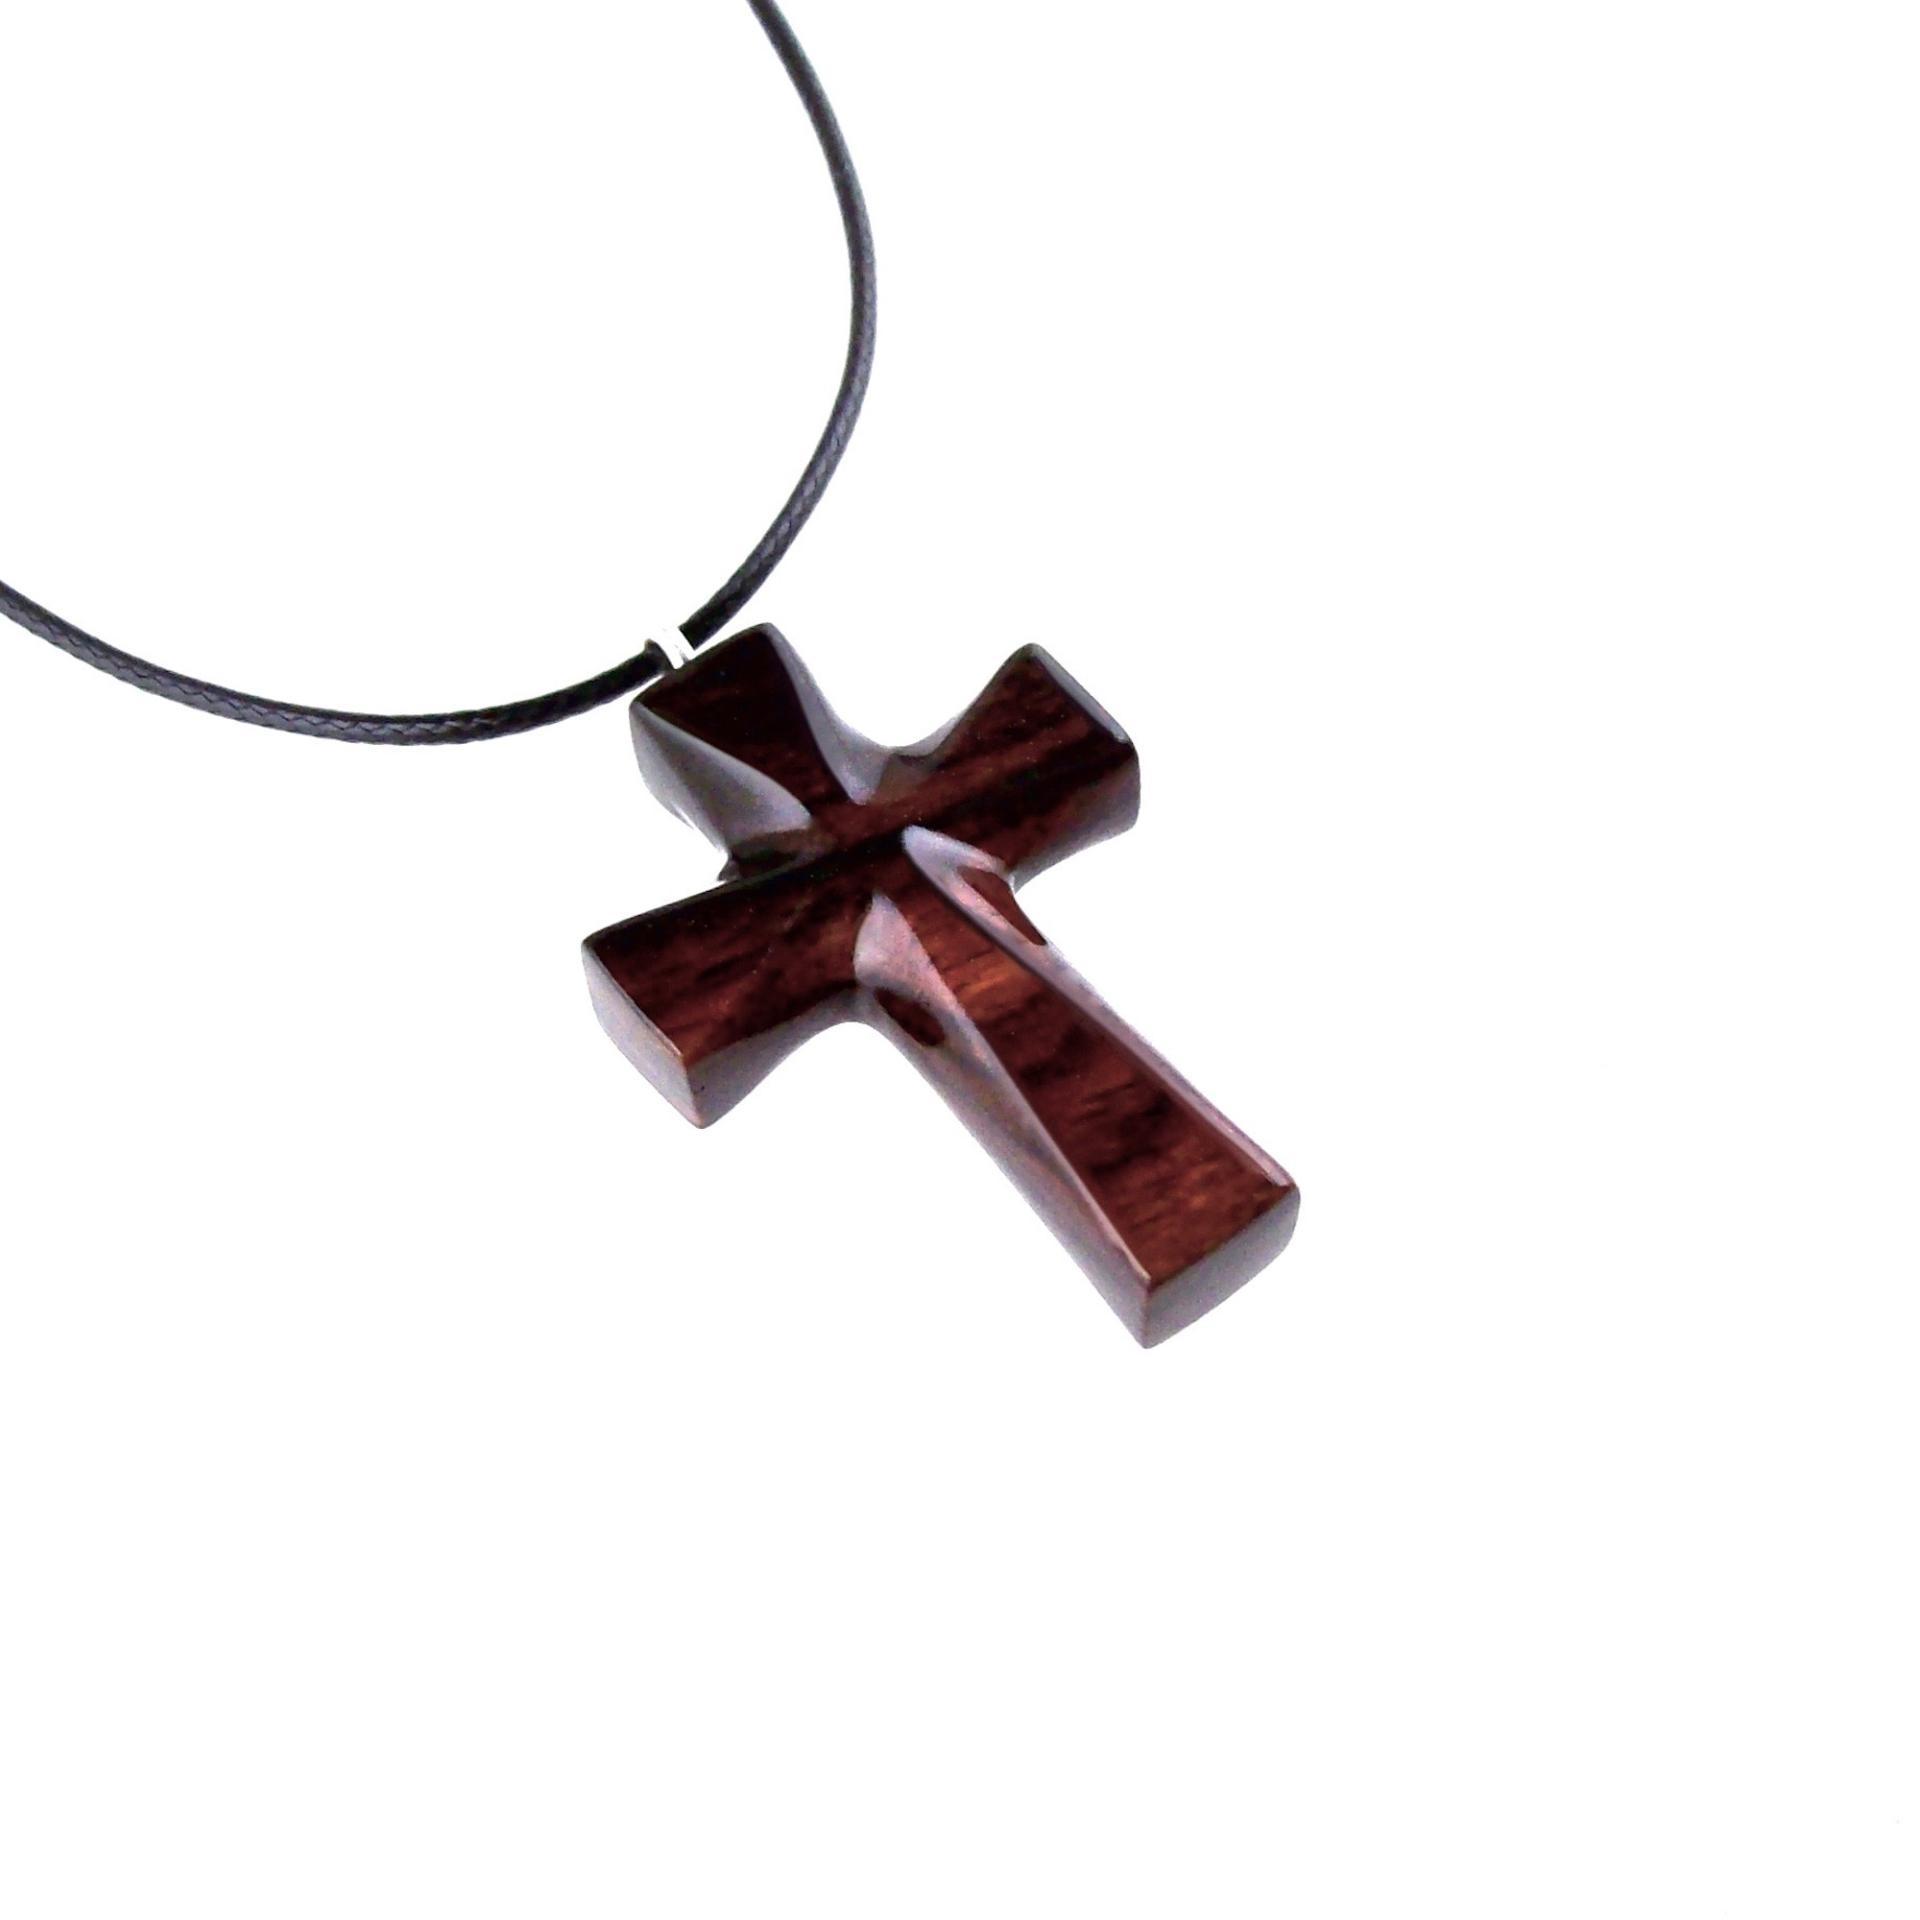 Wooden Cross Necklace, Hand Carved Wood Cross Pendant, Christian Jewelry for Men Women, Gift for Him or Her